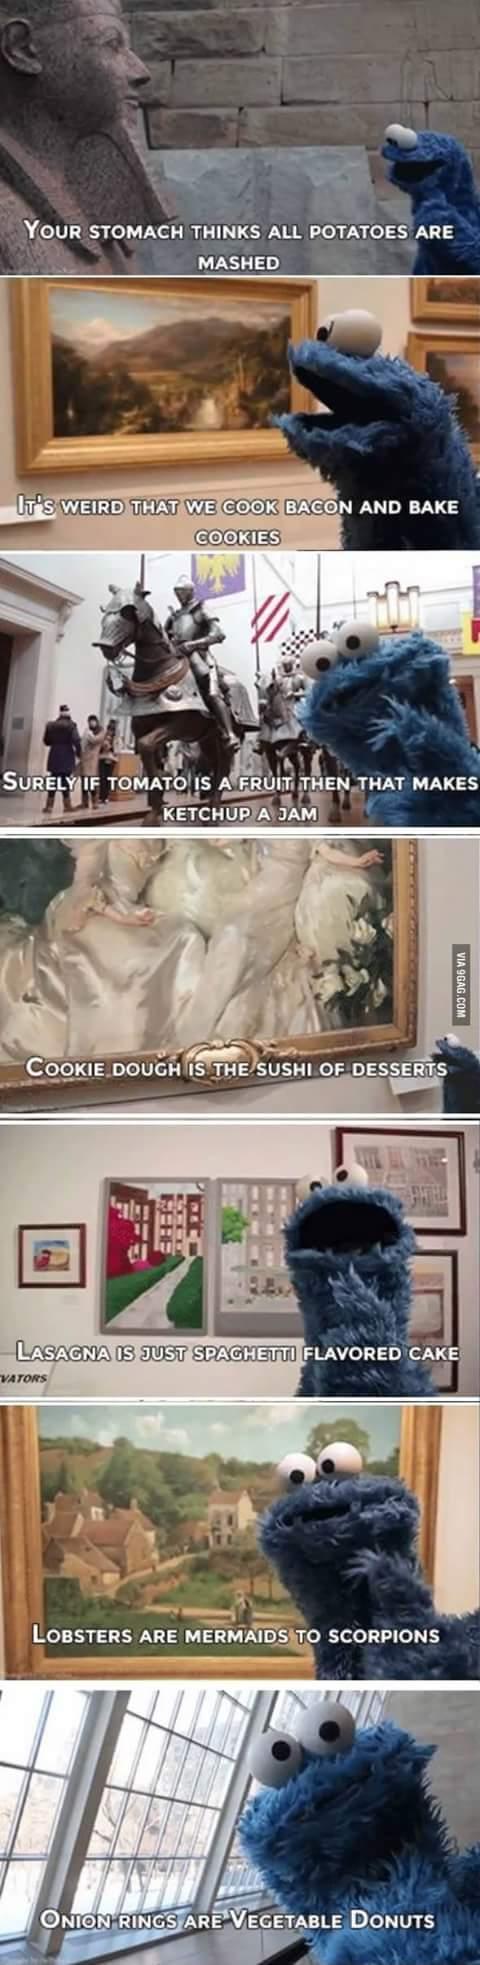 Some shower thoughts from the cookie monster.